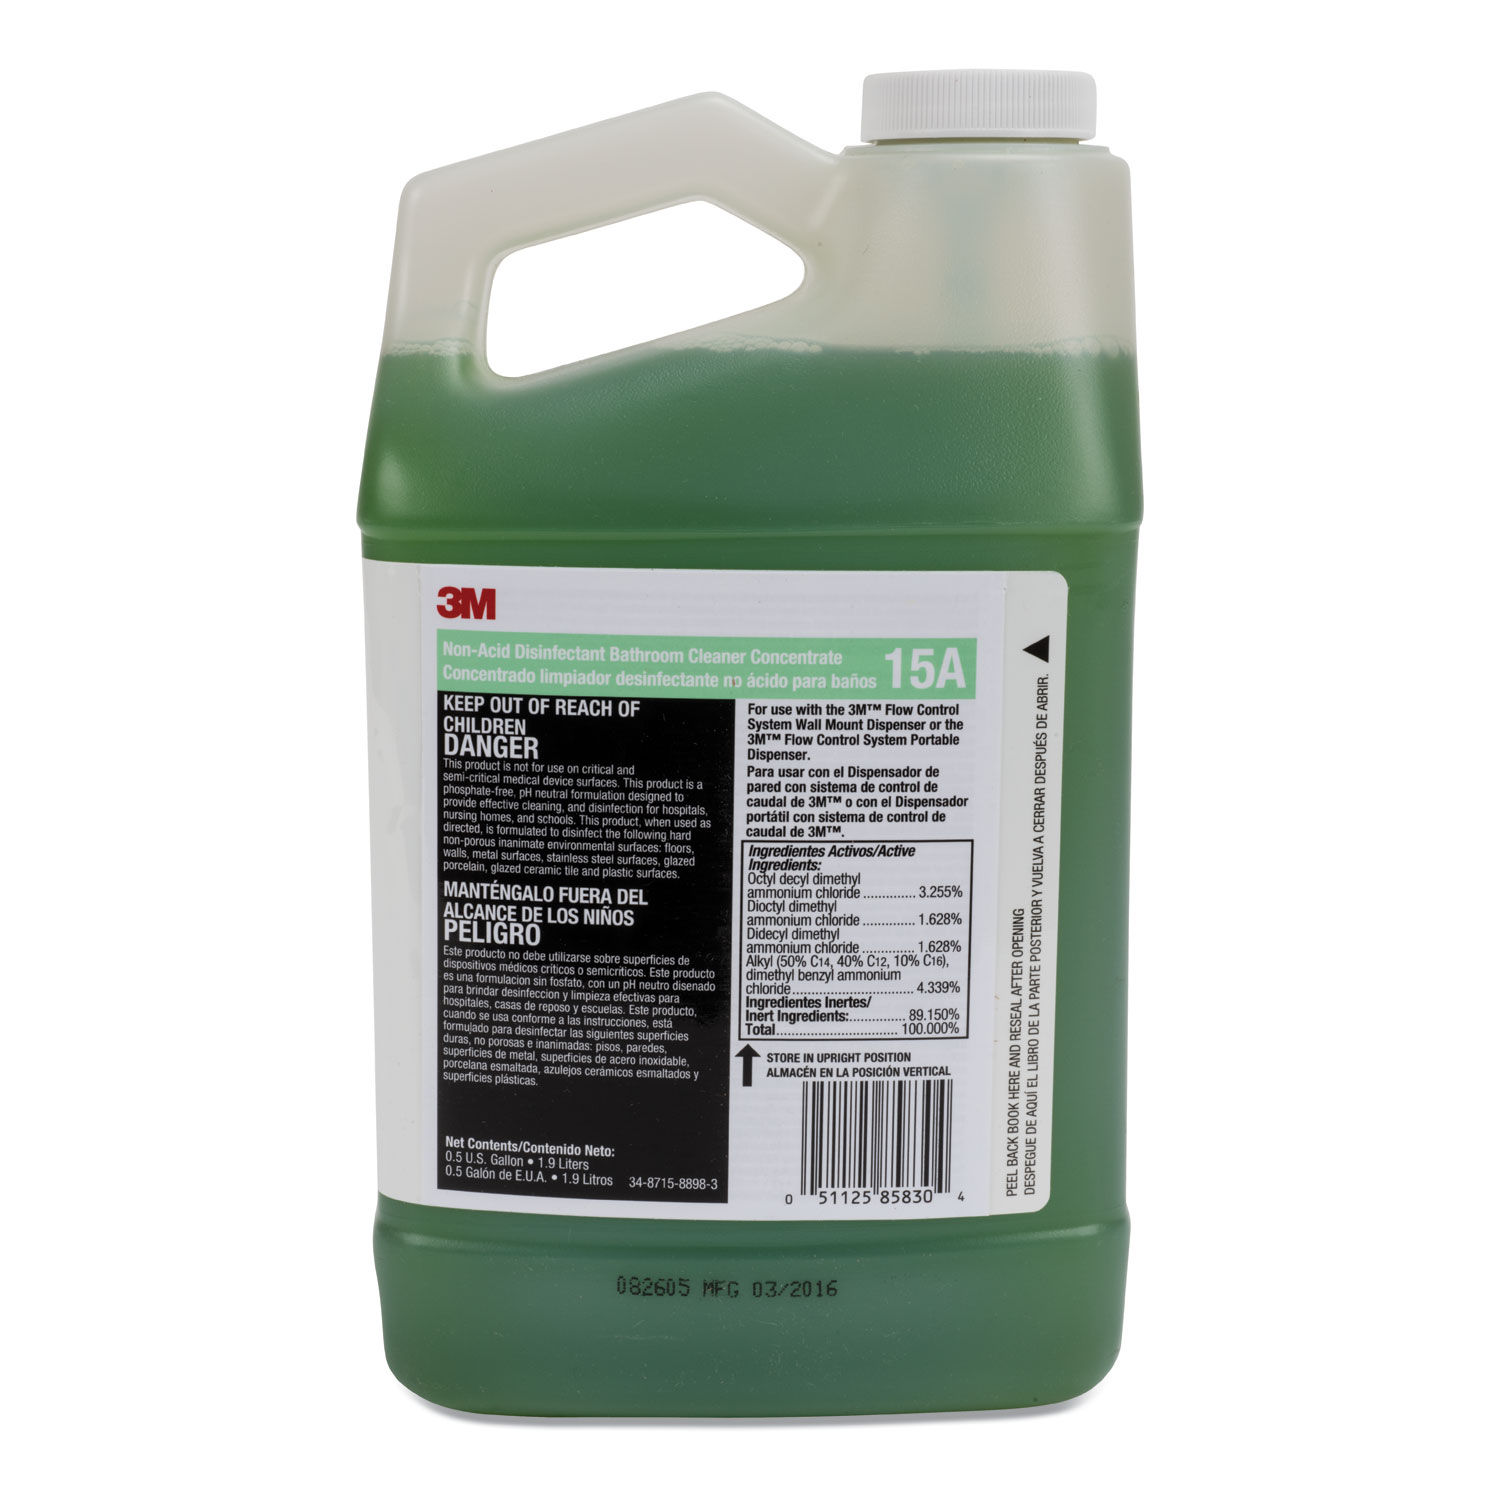 Non-Acid Disinfectant Bathroom Cleaner Concentrate 0.5 gal Bottle, 4/Carton